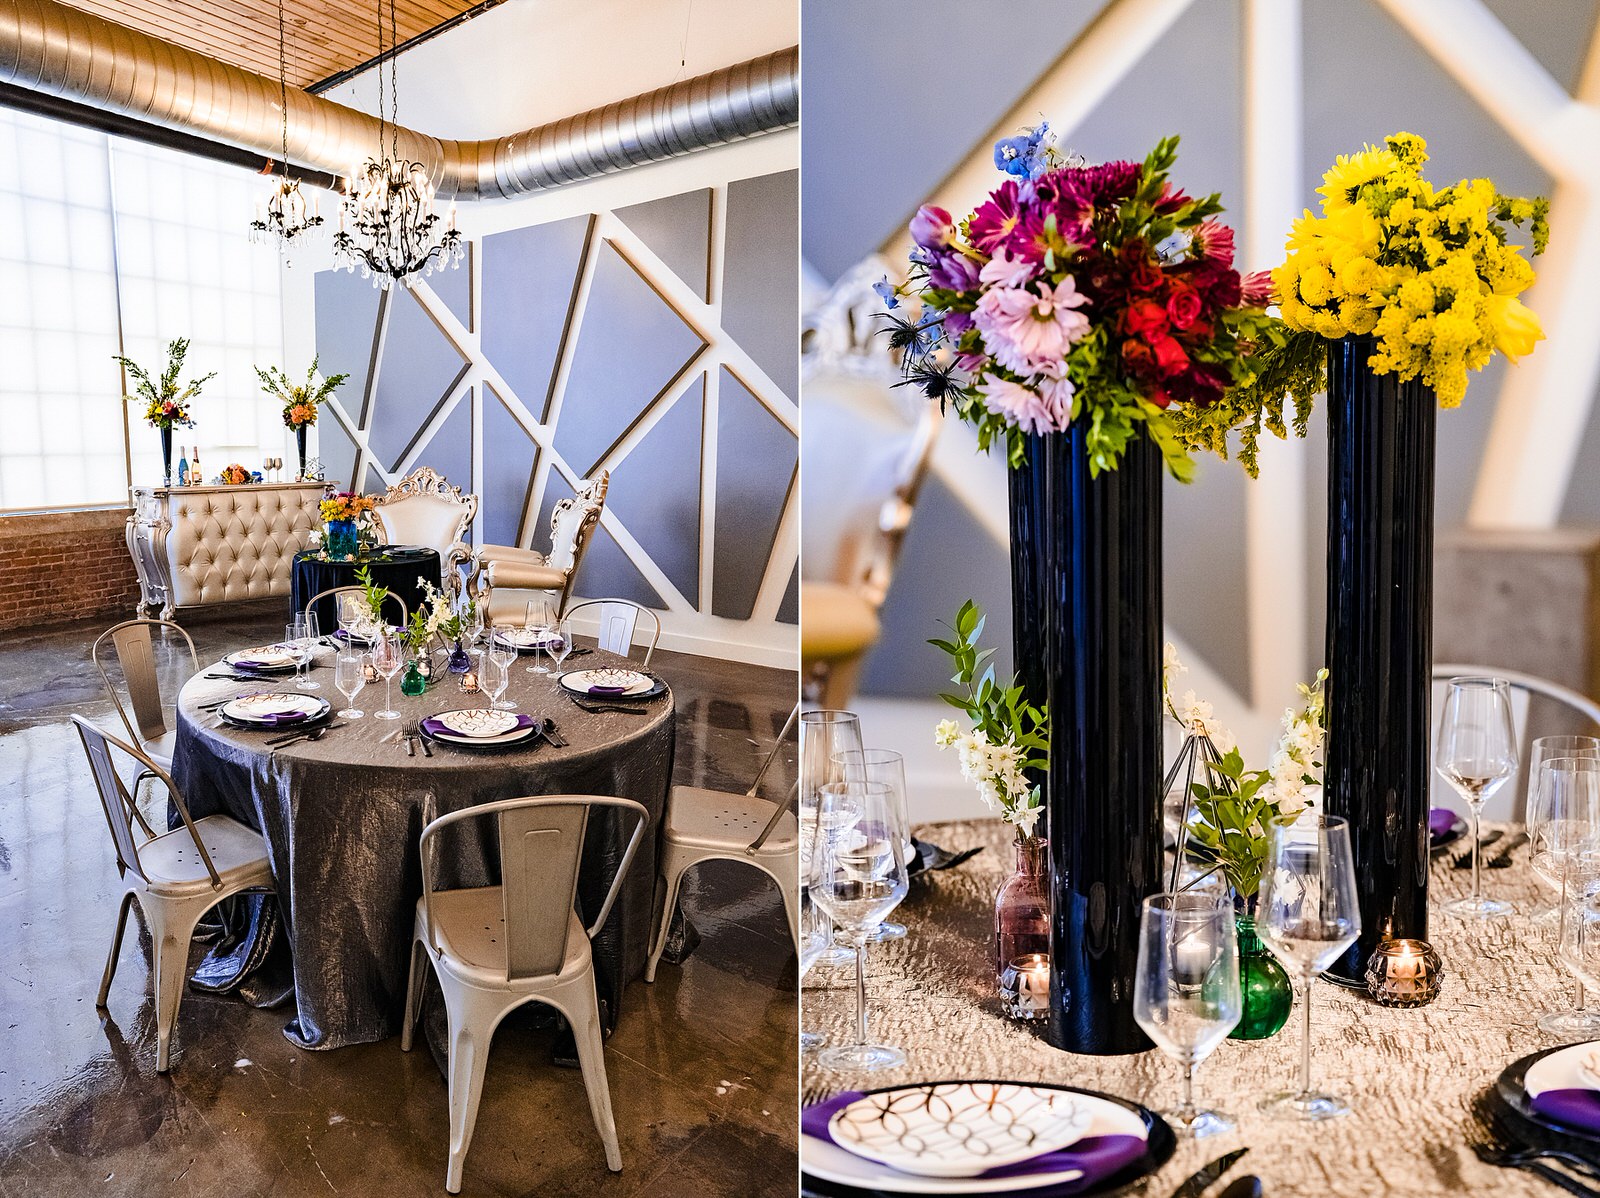 Lucky Strike Suite set up for an intimate wedding as part of a colorful wedding inspiration shoot